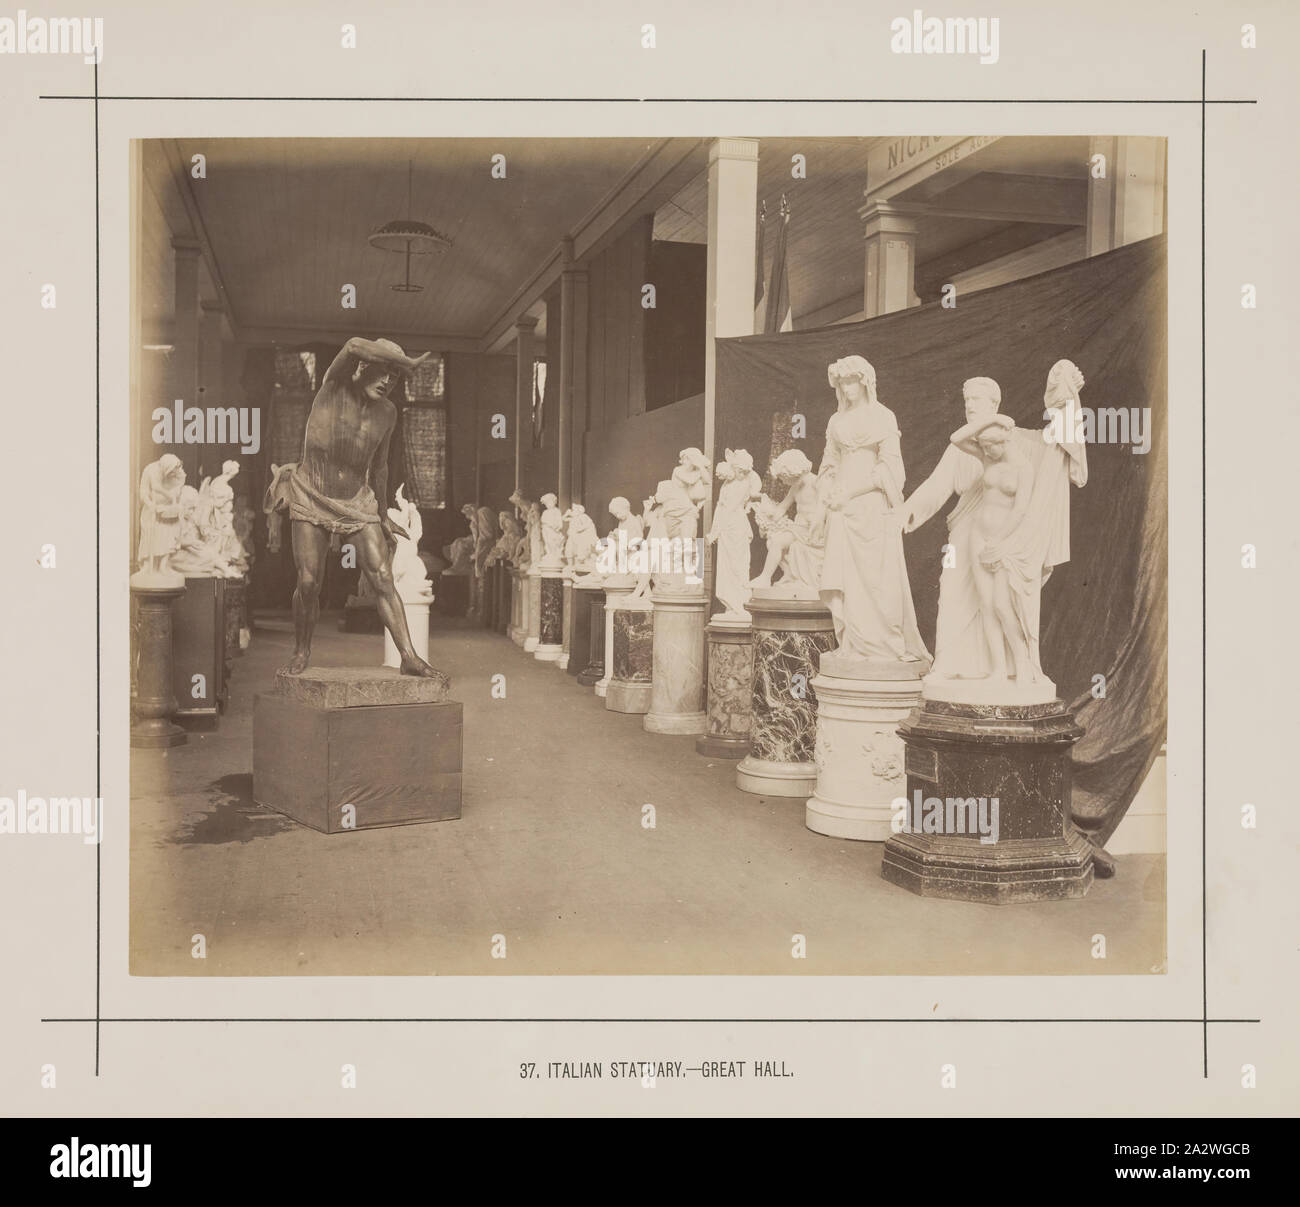 Photograph - Italian Statuary, Great Hall, Exhibition Building, 1880-1881, View of the display of Italian statuary in the Italian Court's display in the Great Hall at the 1880 Melbourne International Exhibition held at the Exhibition Buildings, Carlton Gardens, between 1 October 1880 and 30 April 1881. In addition to the main permanent Exhibition Building, two permanent annexes as well as a large, central wooden temporary annexe was constructed to house the courts of Stock Photo